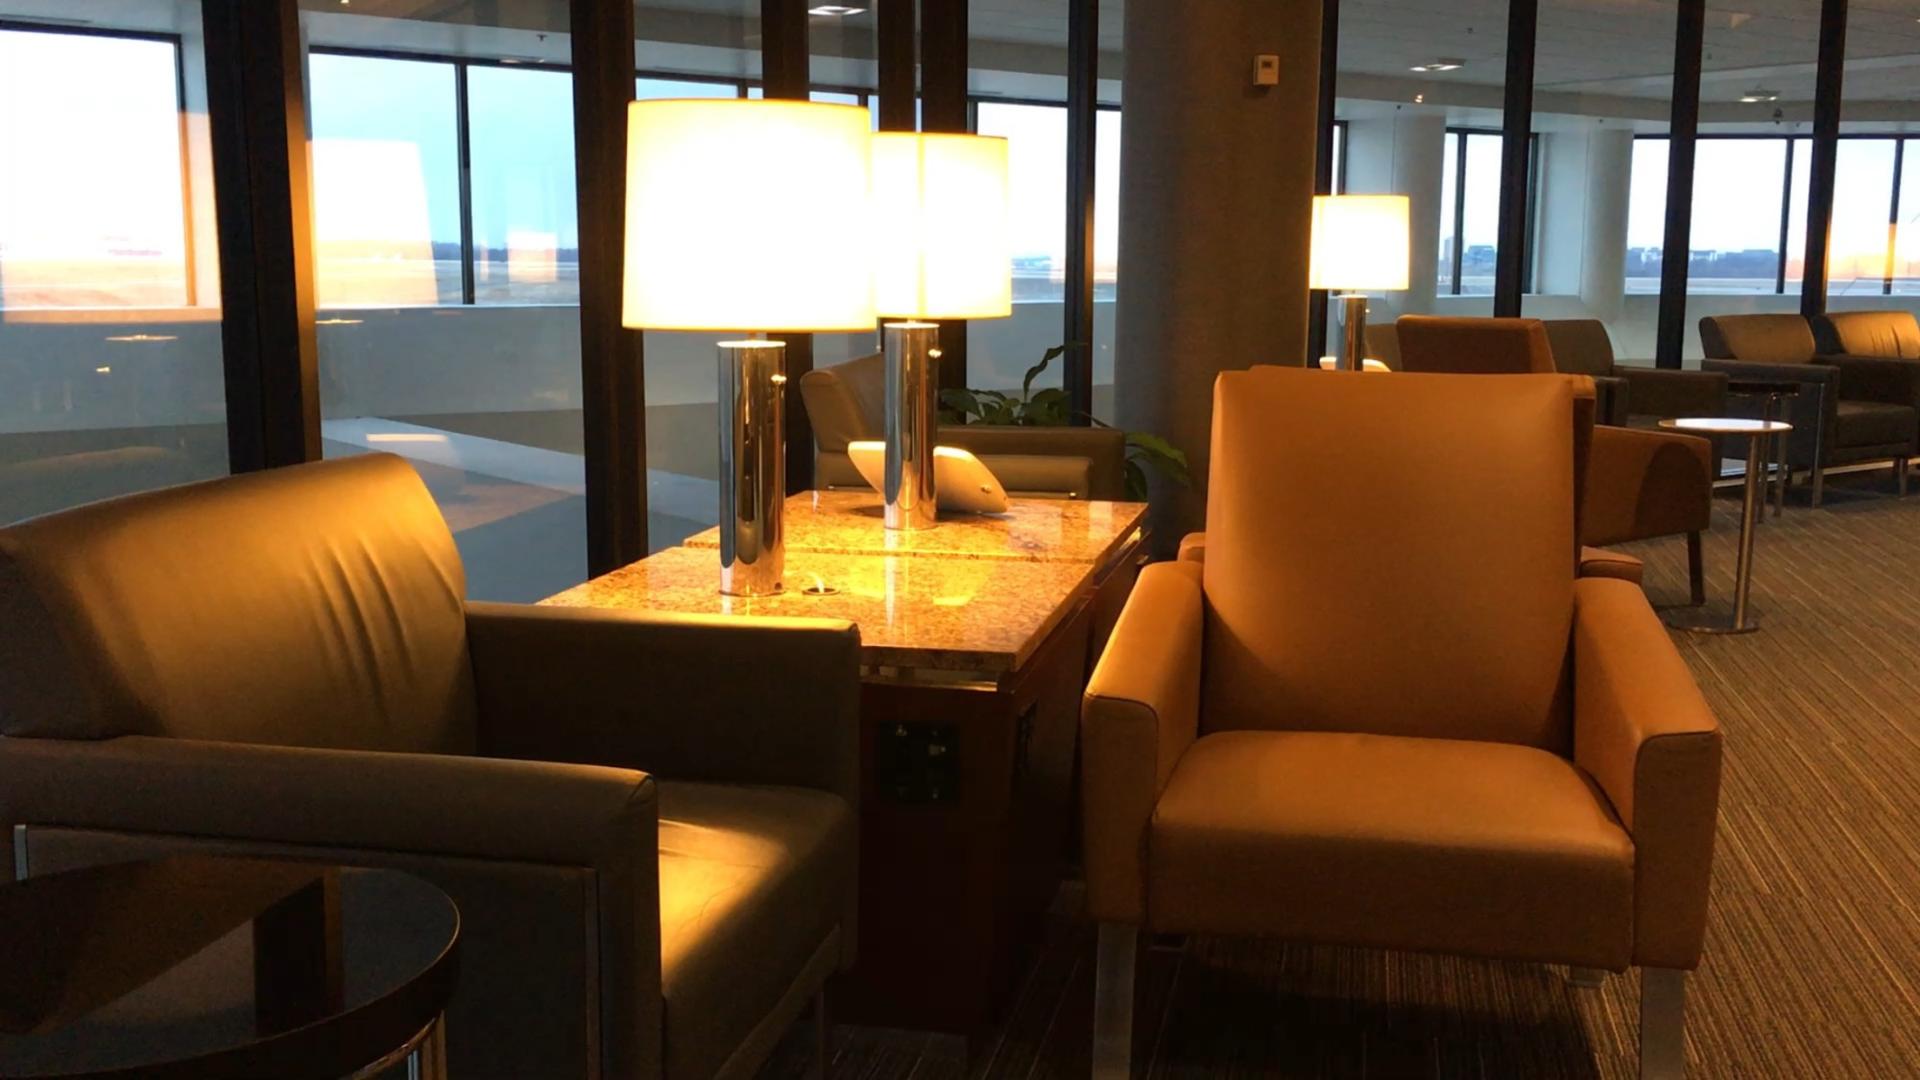 American Airlines Admirals Club image 8 of 16